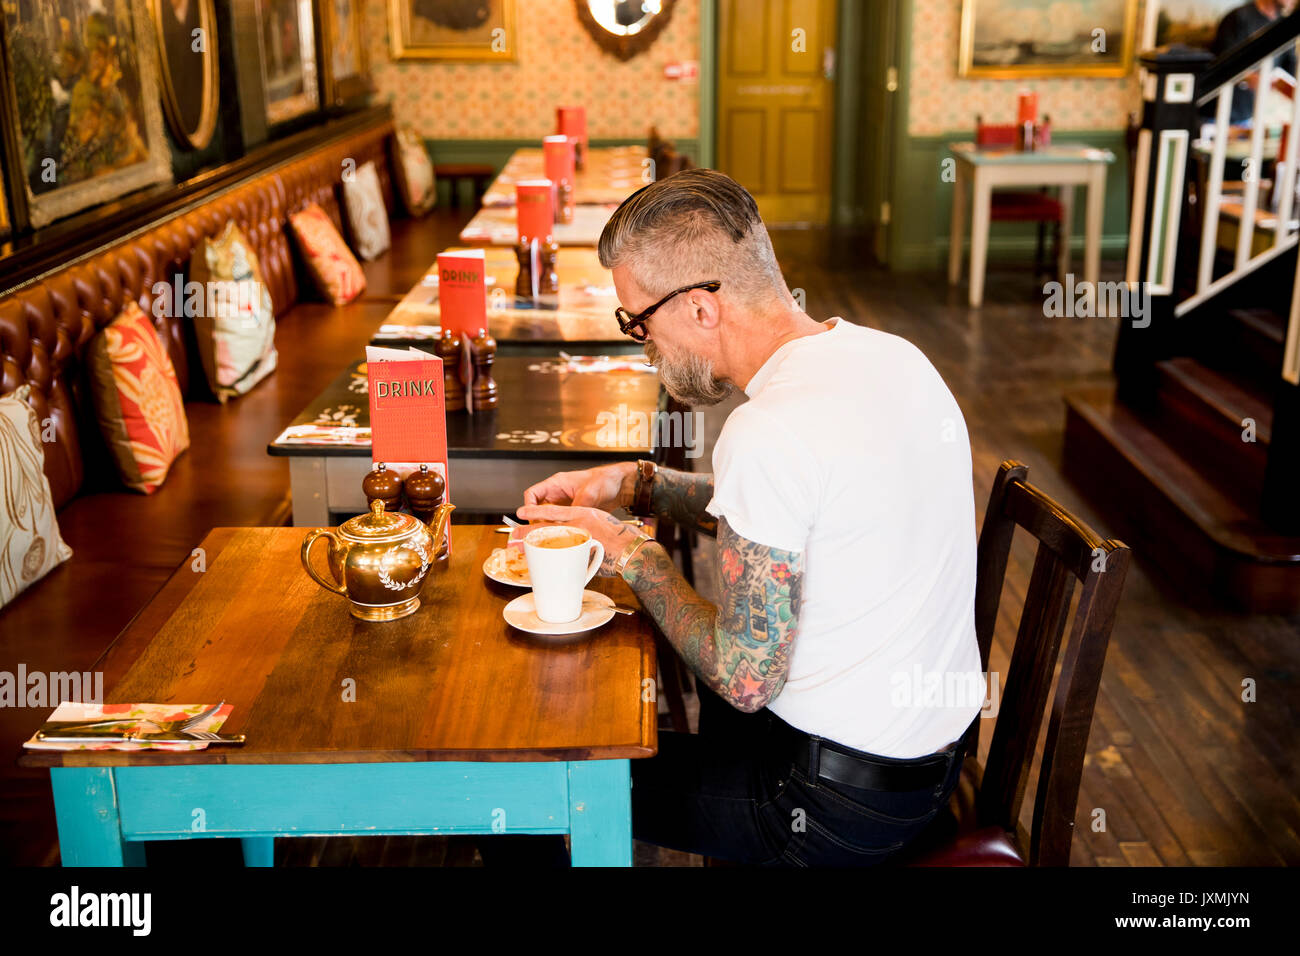 Quirky man eating in bar and restaurant, Bournemouth, England Stock Photo